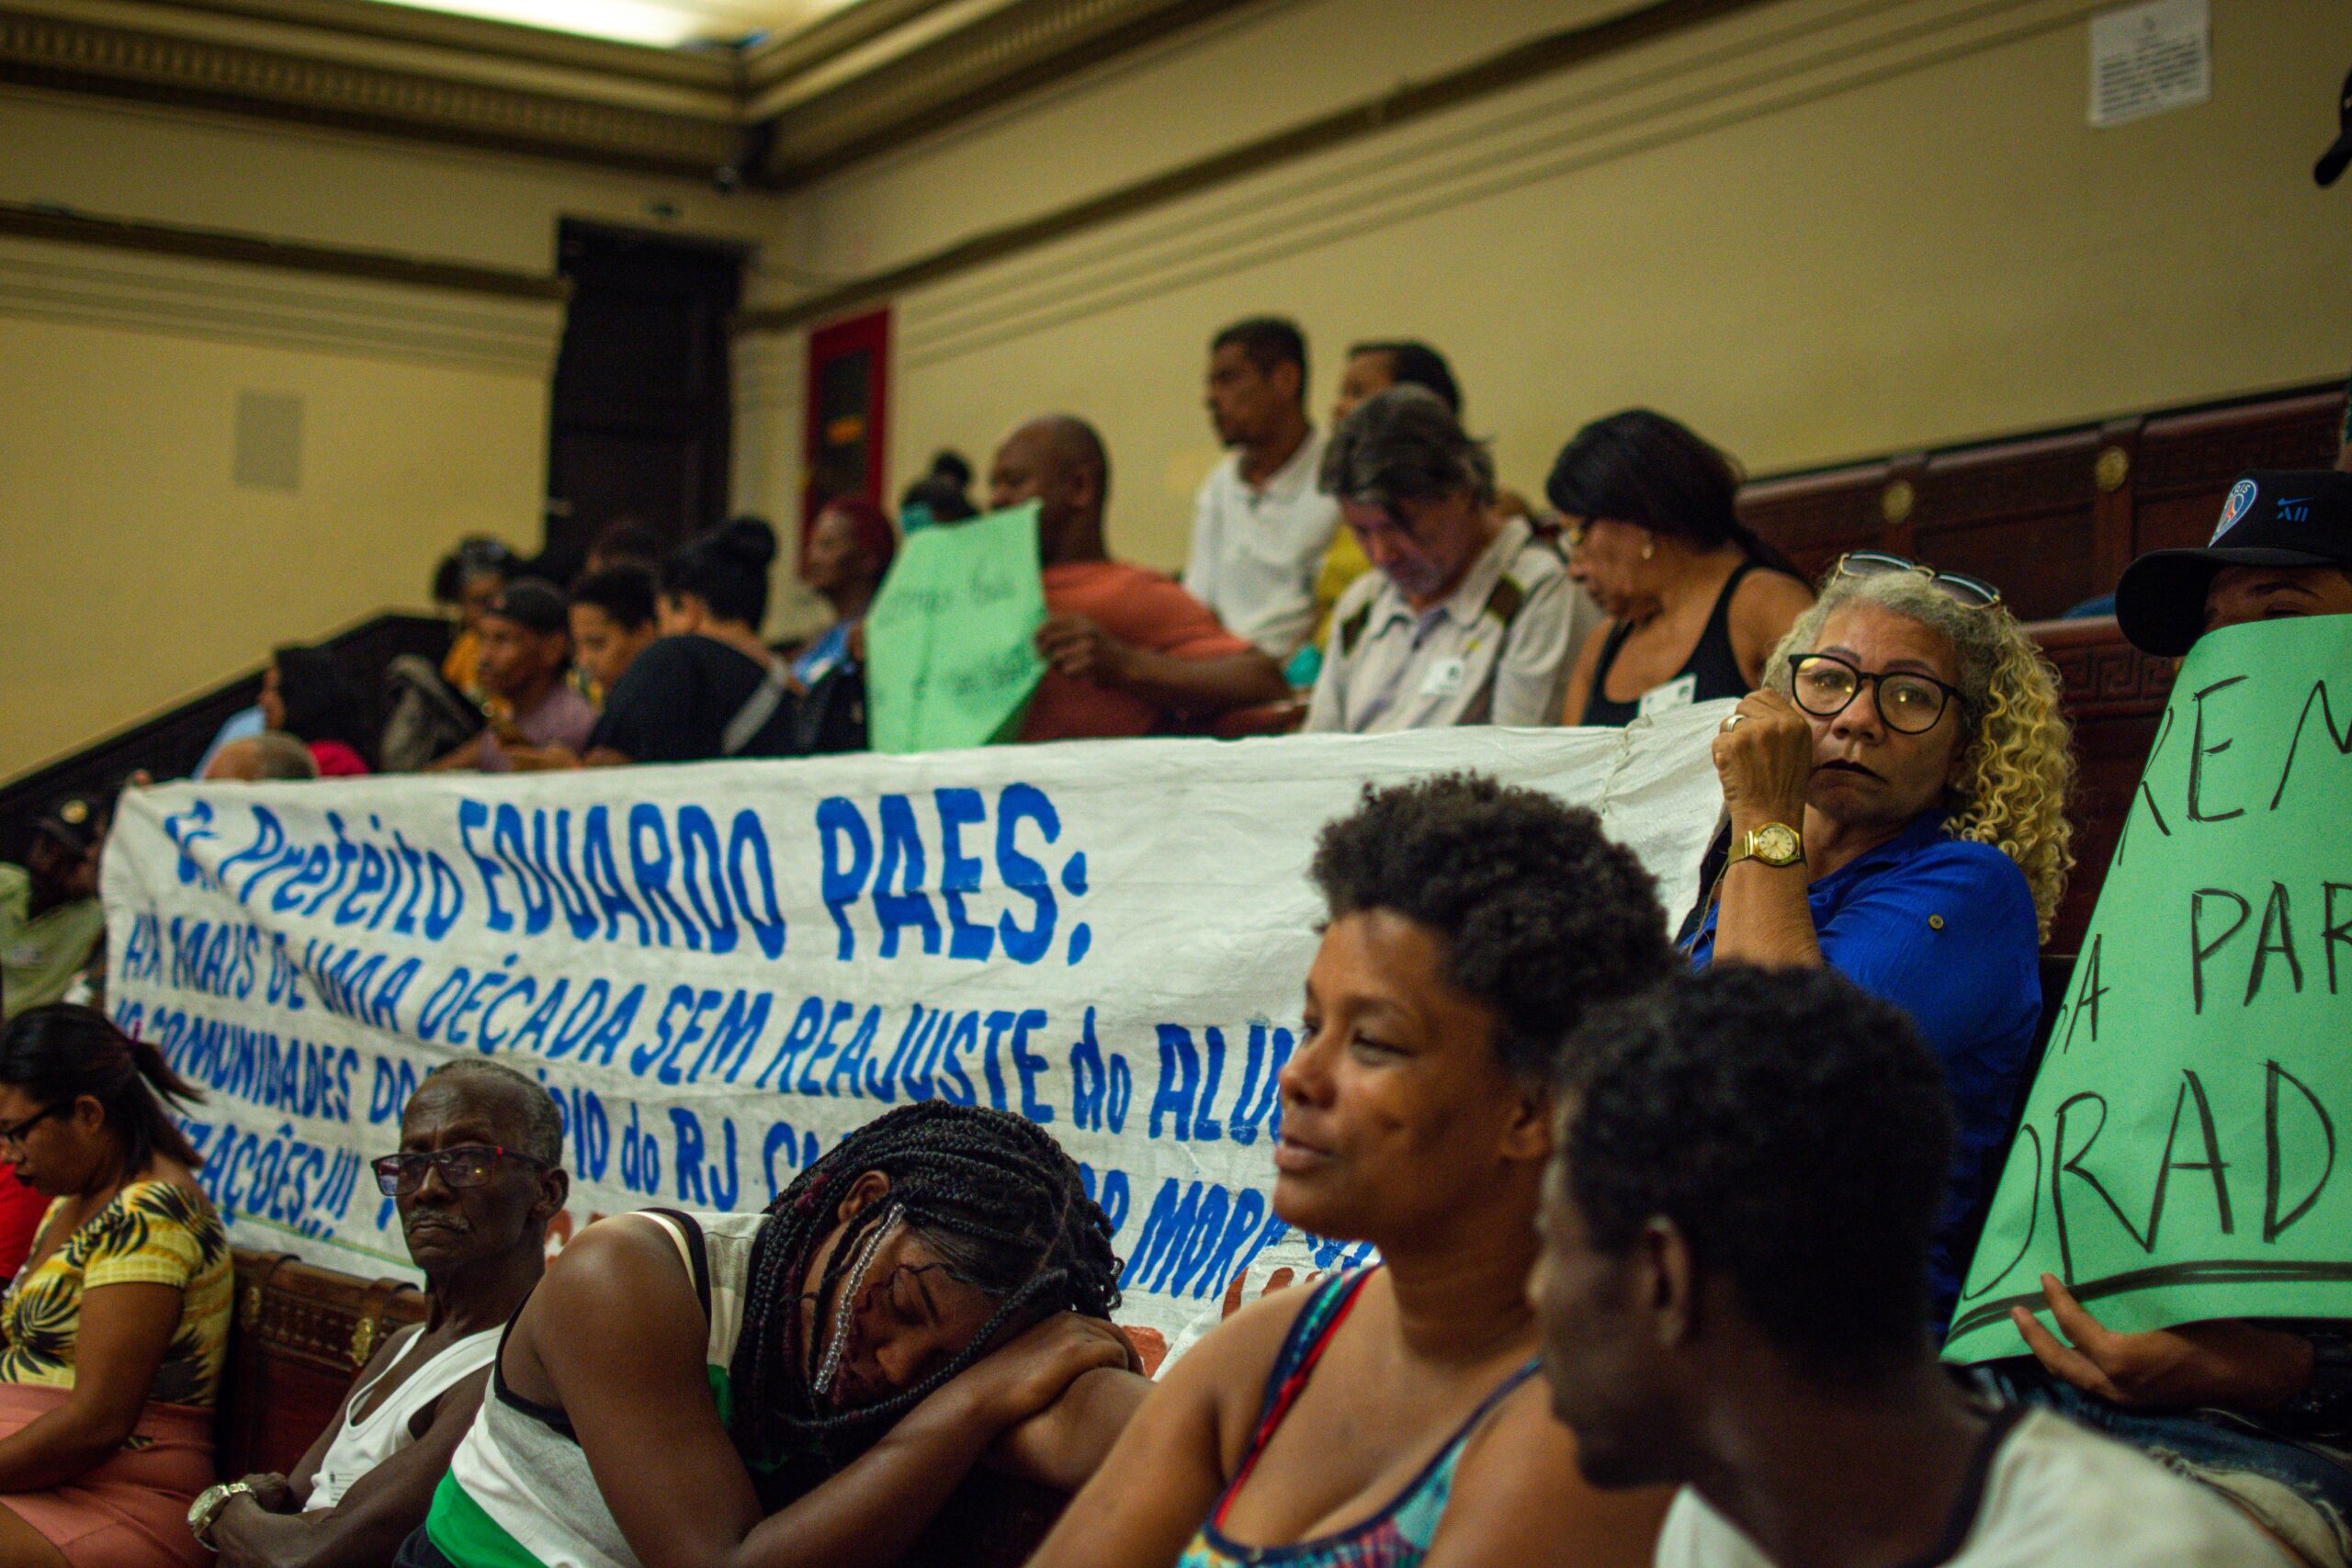 Banner reads “Mayor Eduardo Paes, we have not had an adjustment to social rent for over a decade…”